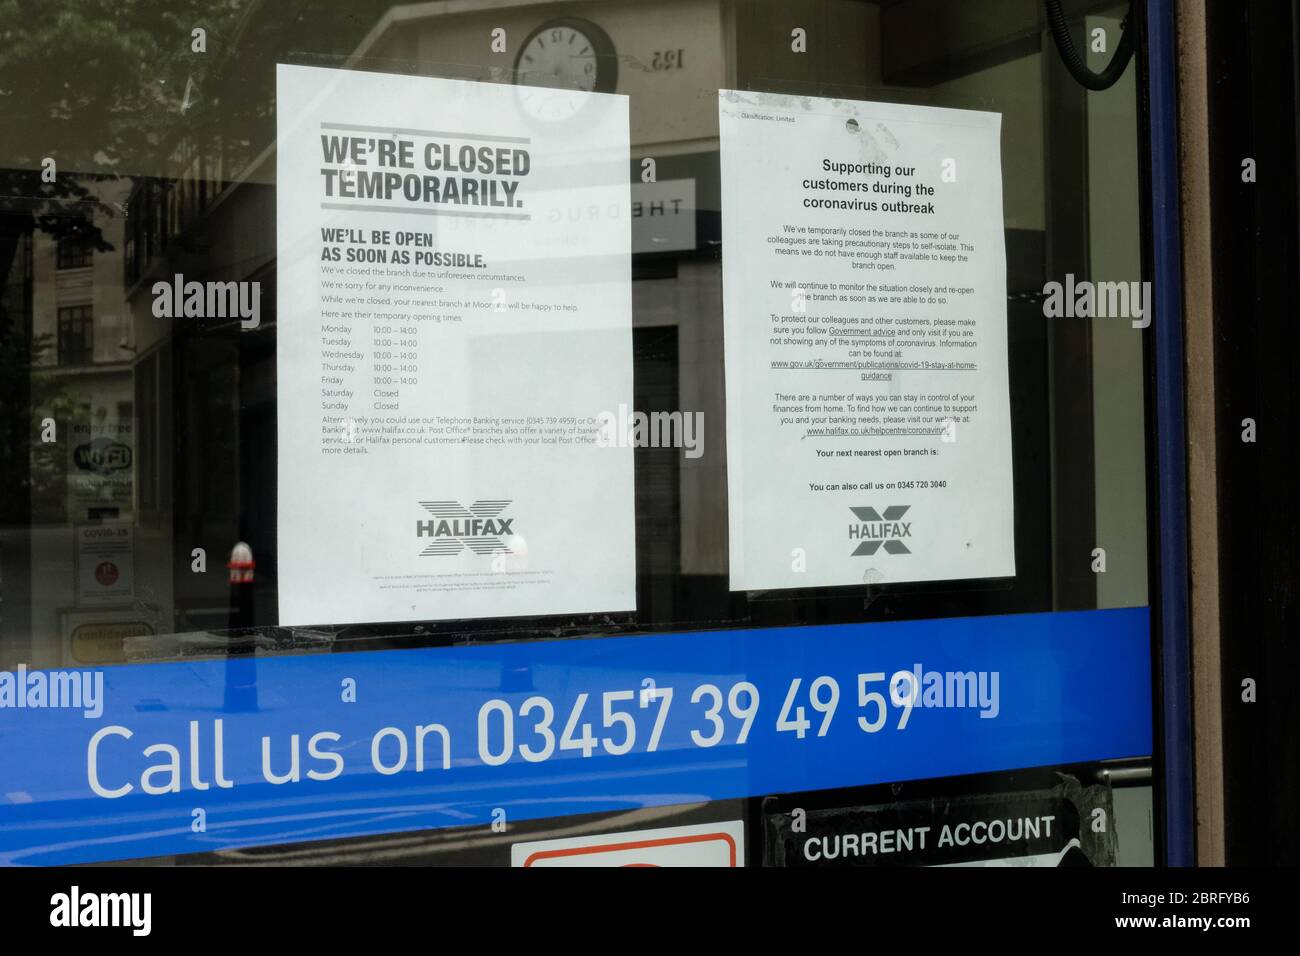 Shop notice for customers on Halifax bank branch, temporarily closed due to coronavirus lockdown, London England UK Stock Photo